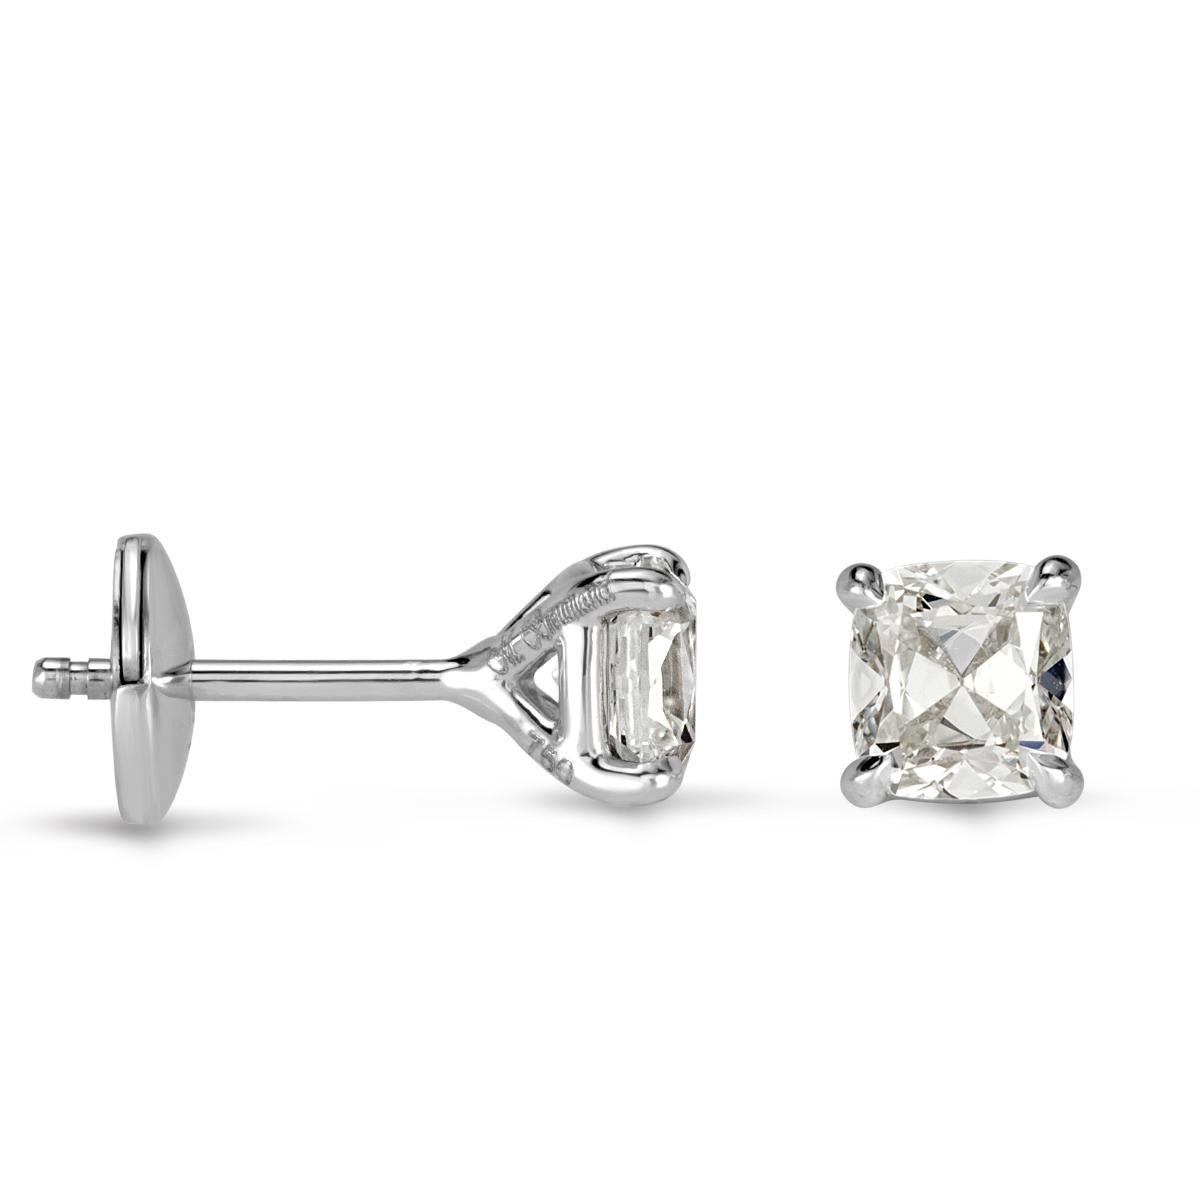 This gorgeous pair of old mine cut diamond stud earrings are glamorously chic. They showcase 1.00ct diamonds in total and are certified at F-G colors, VS1-VS2 clarities. They face up white and are perfectly eyeclean. They are handset on a feminine